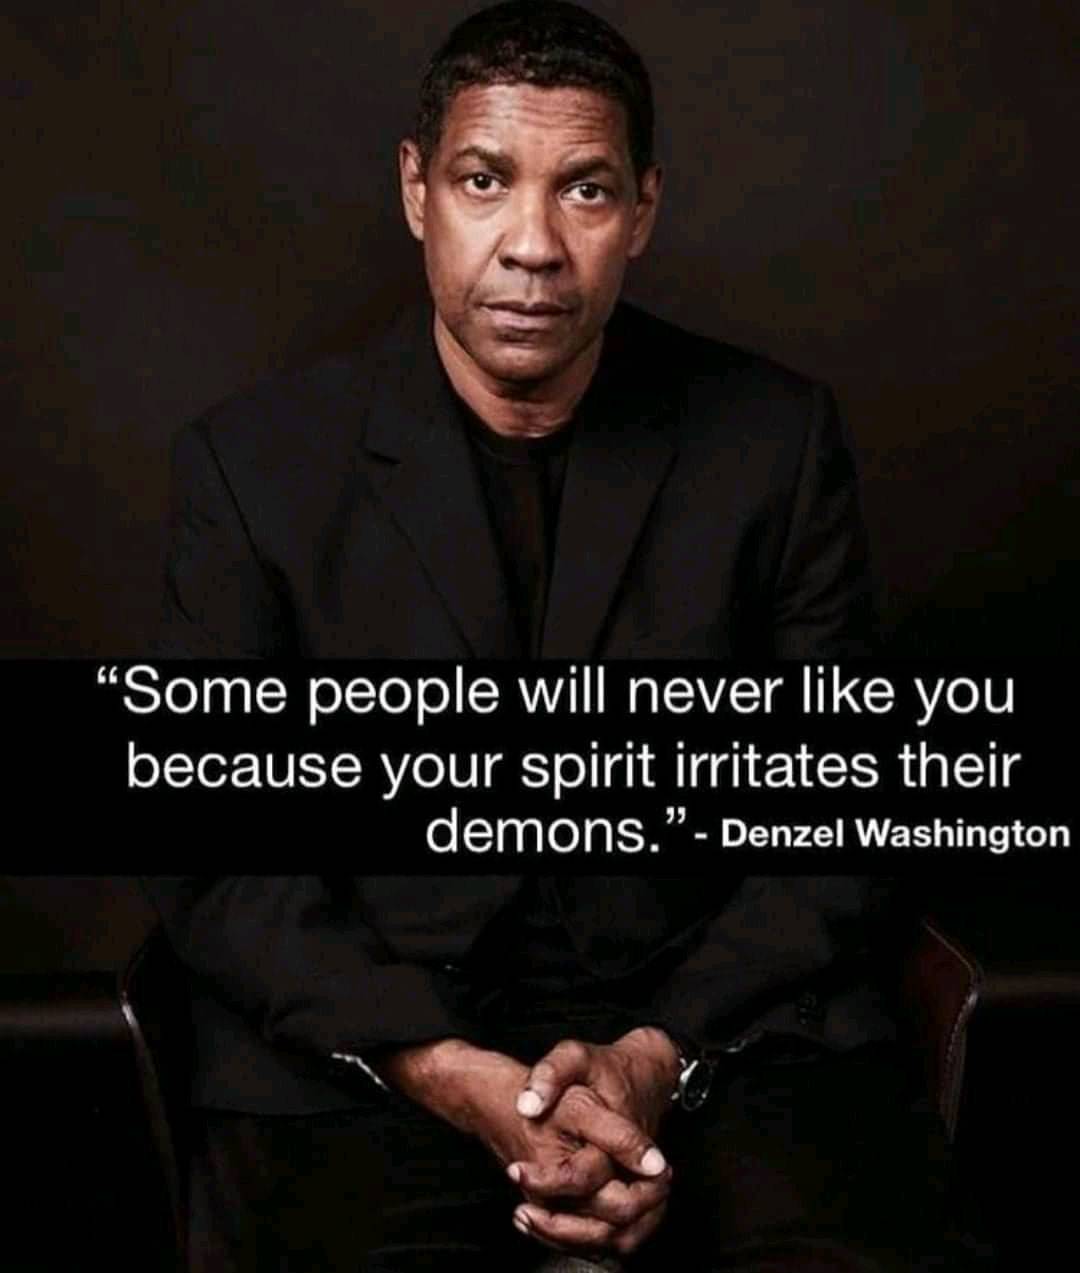 Some people will never like you because your spirit irritated their demons.